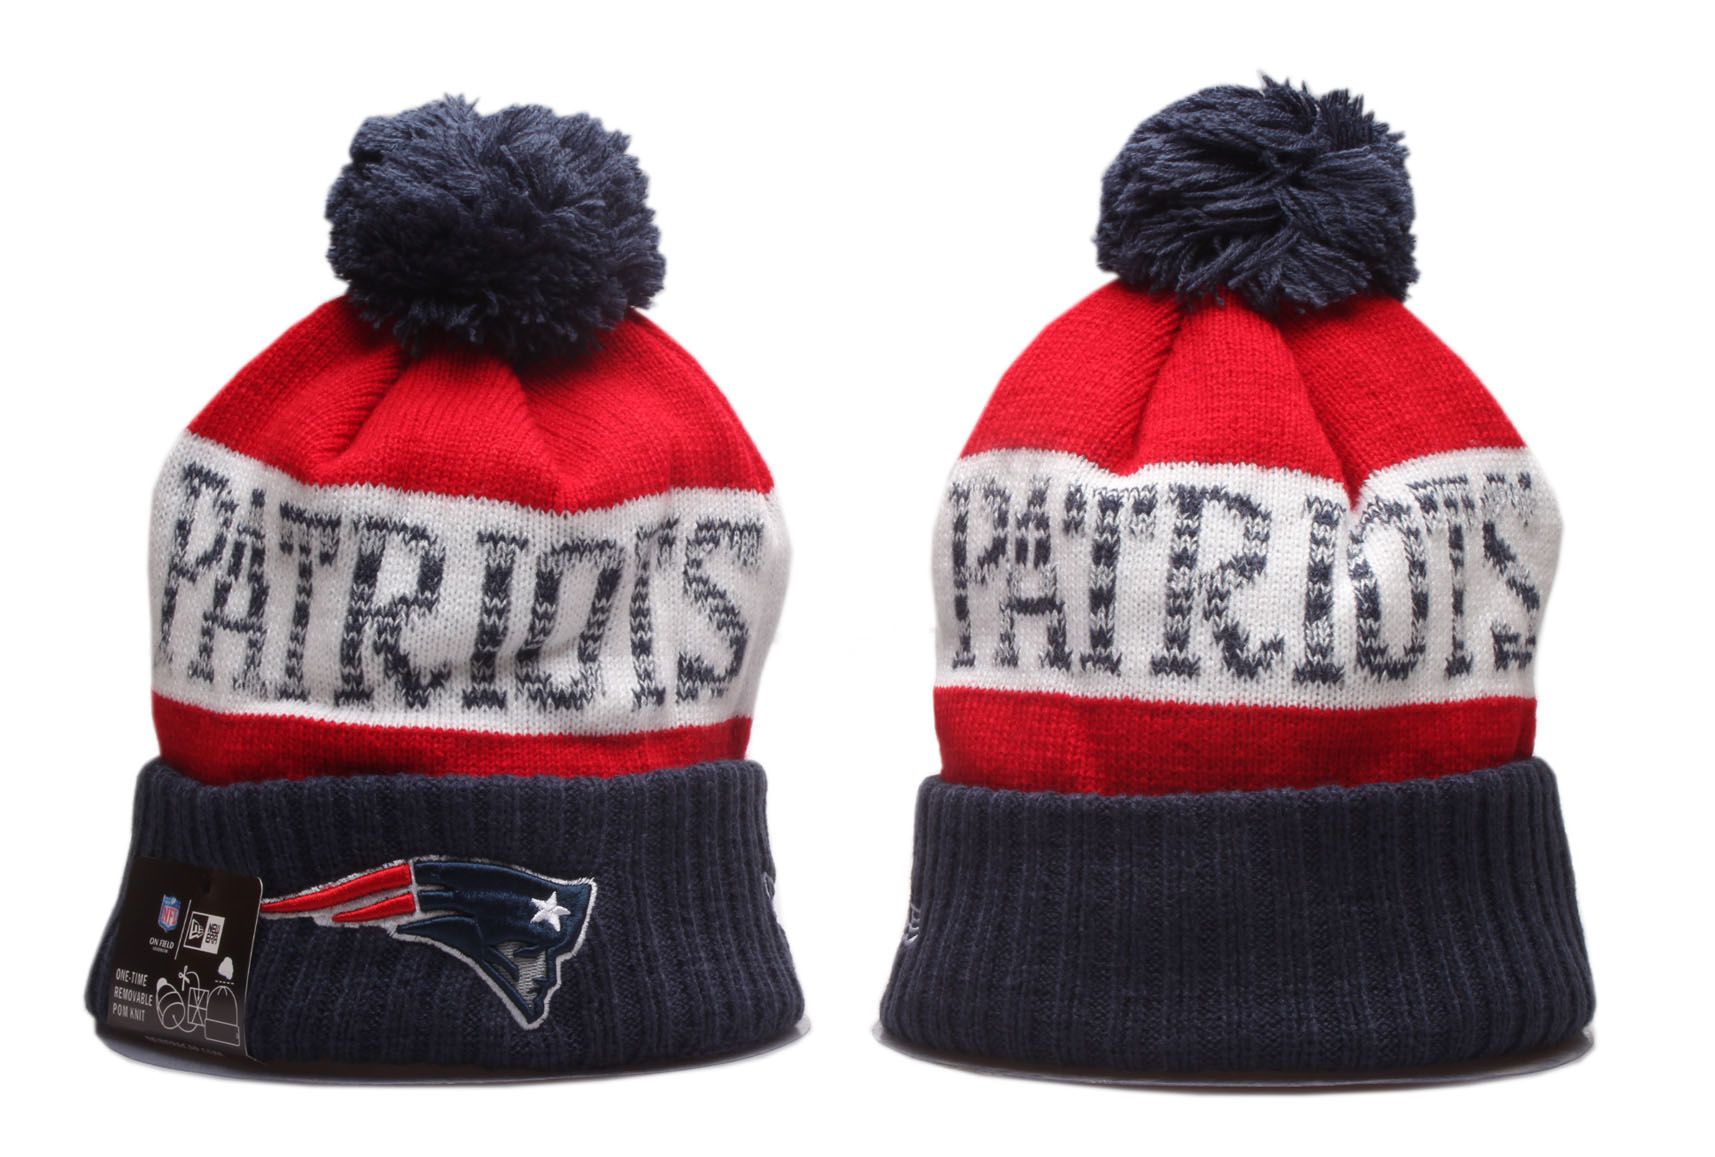 2023 NFL New England Patriots beanies ypmy2->new england patriots->NFL Jersey